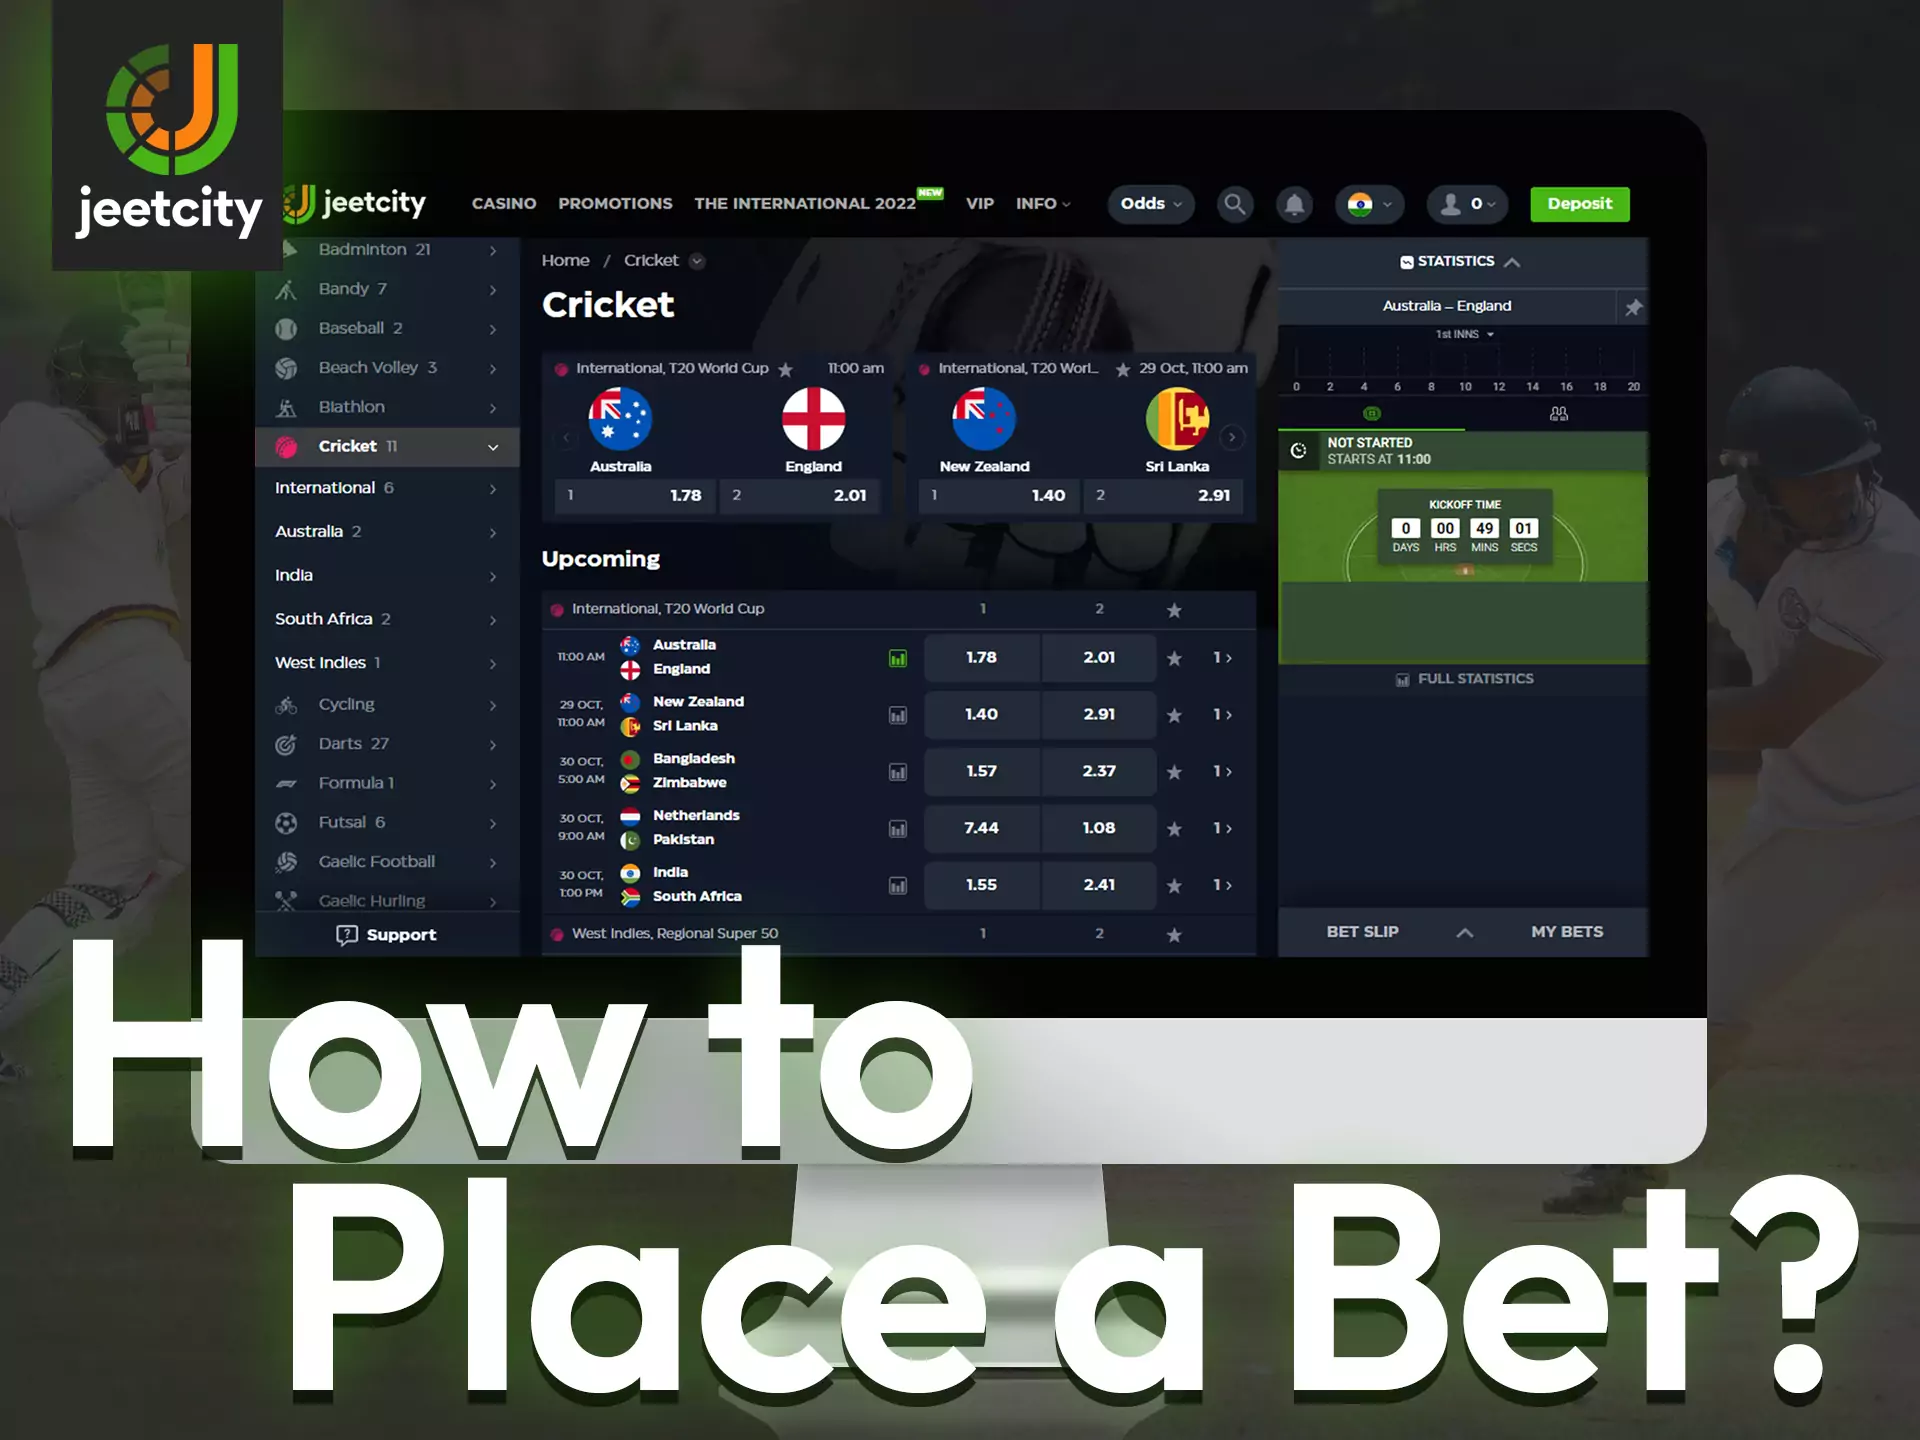 Use the instructions to learn how to bet on JeetCity.